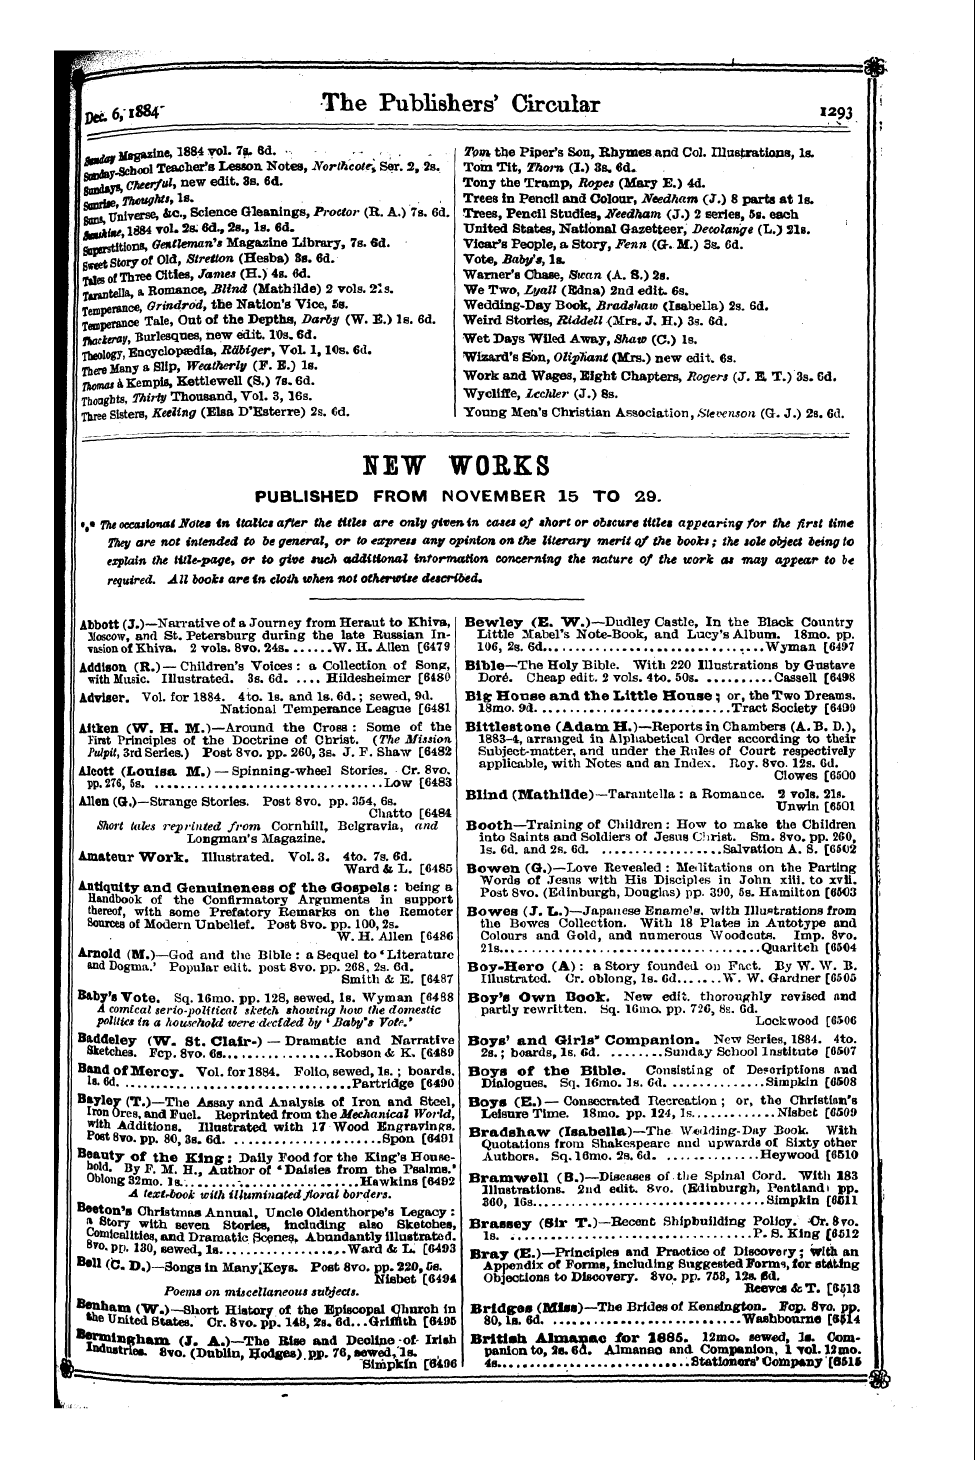 Publishers’ Circular (1880-1890): jS F Y, 1st edition - I Few Works I Published From November 15 To 29.